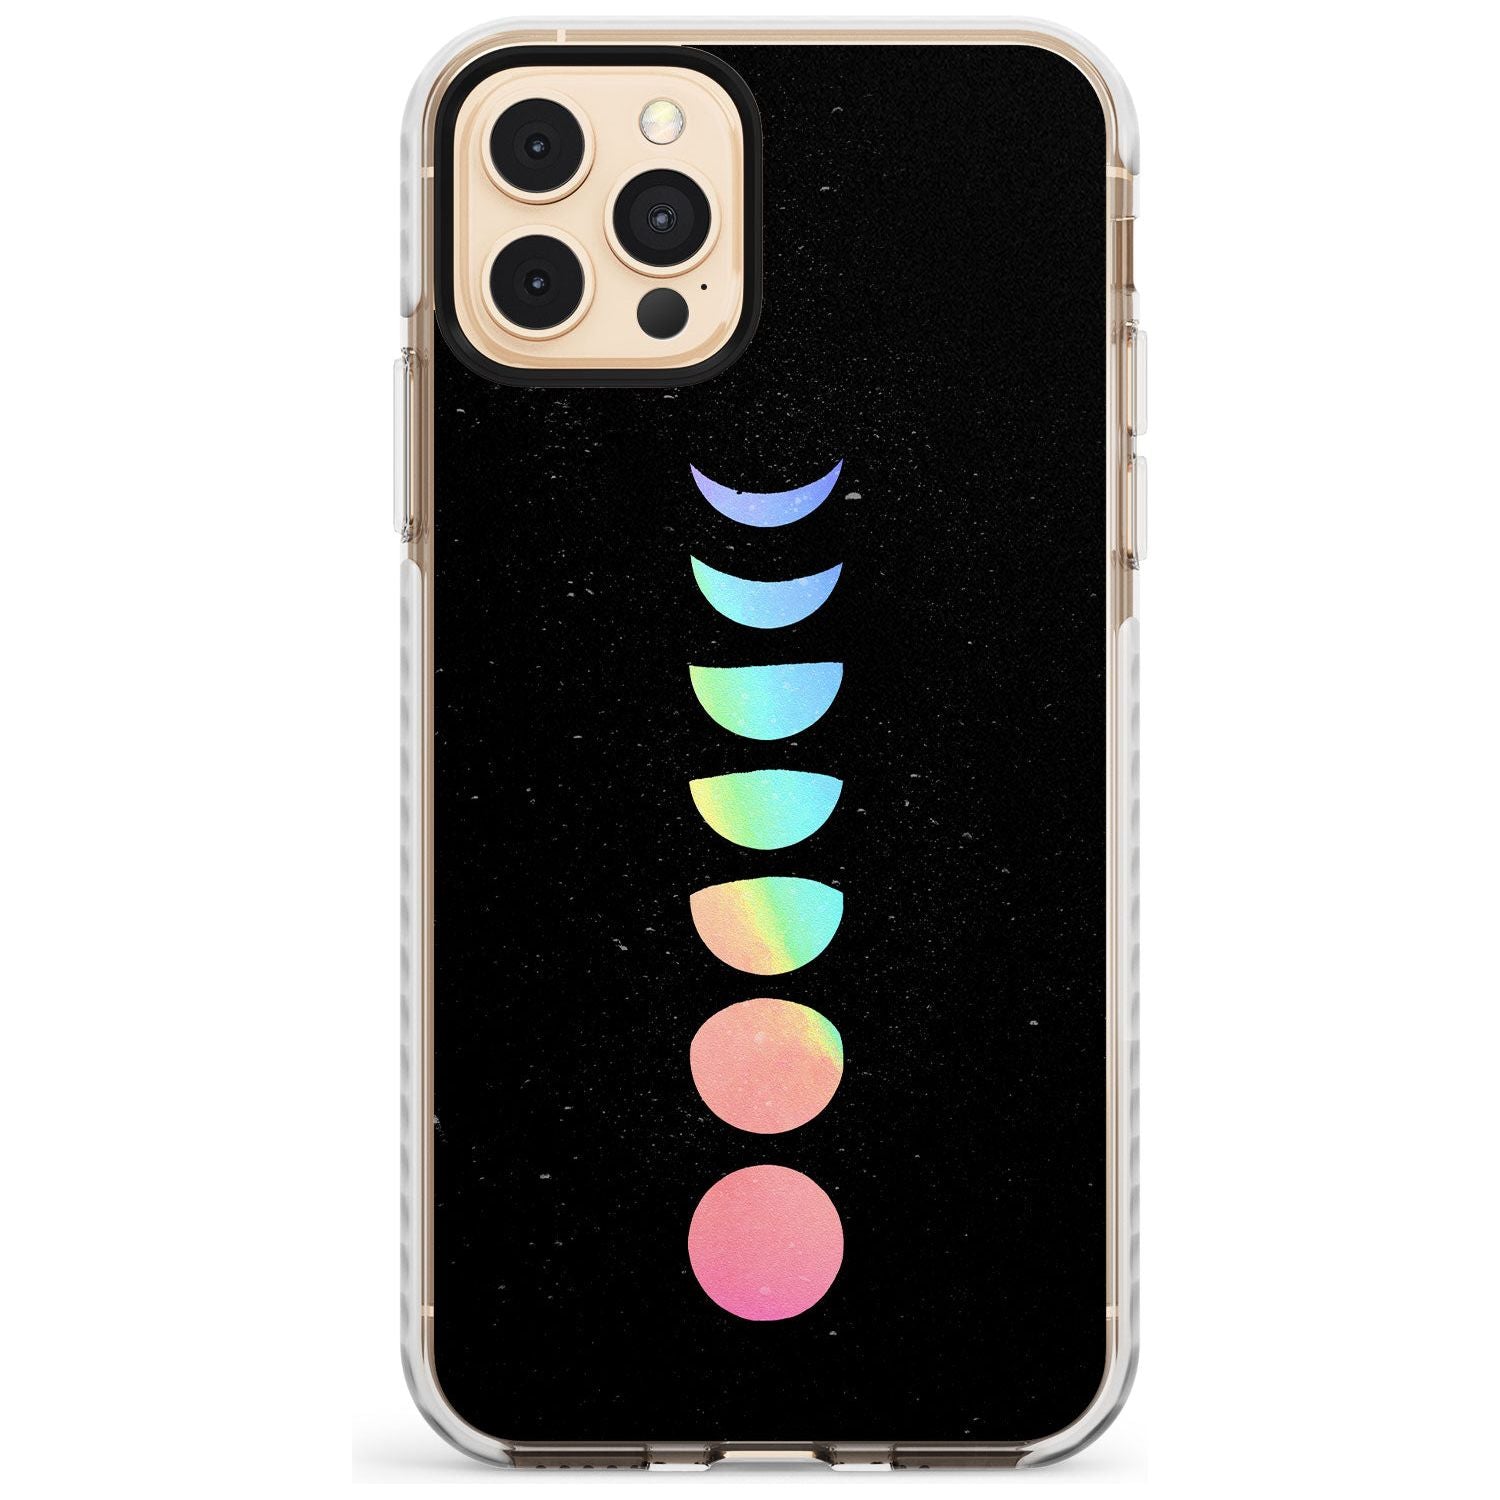 Pastel Moon Phases Slim TPU Phone Case for iPhone 11 Pro Max